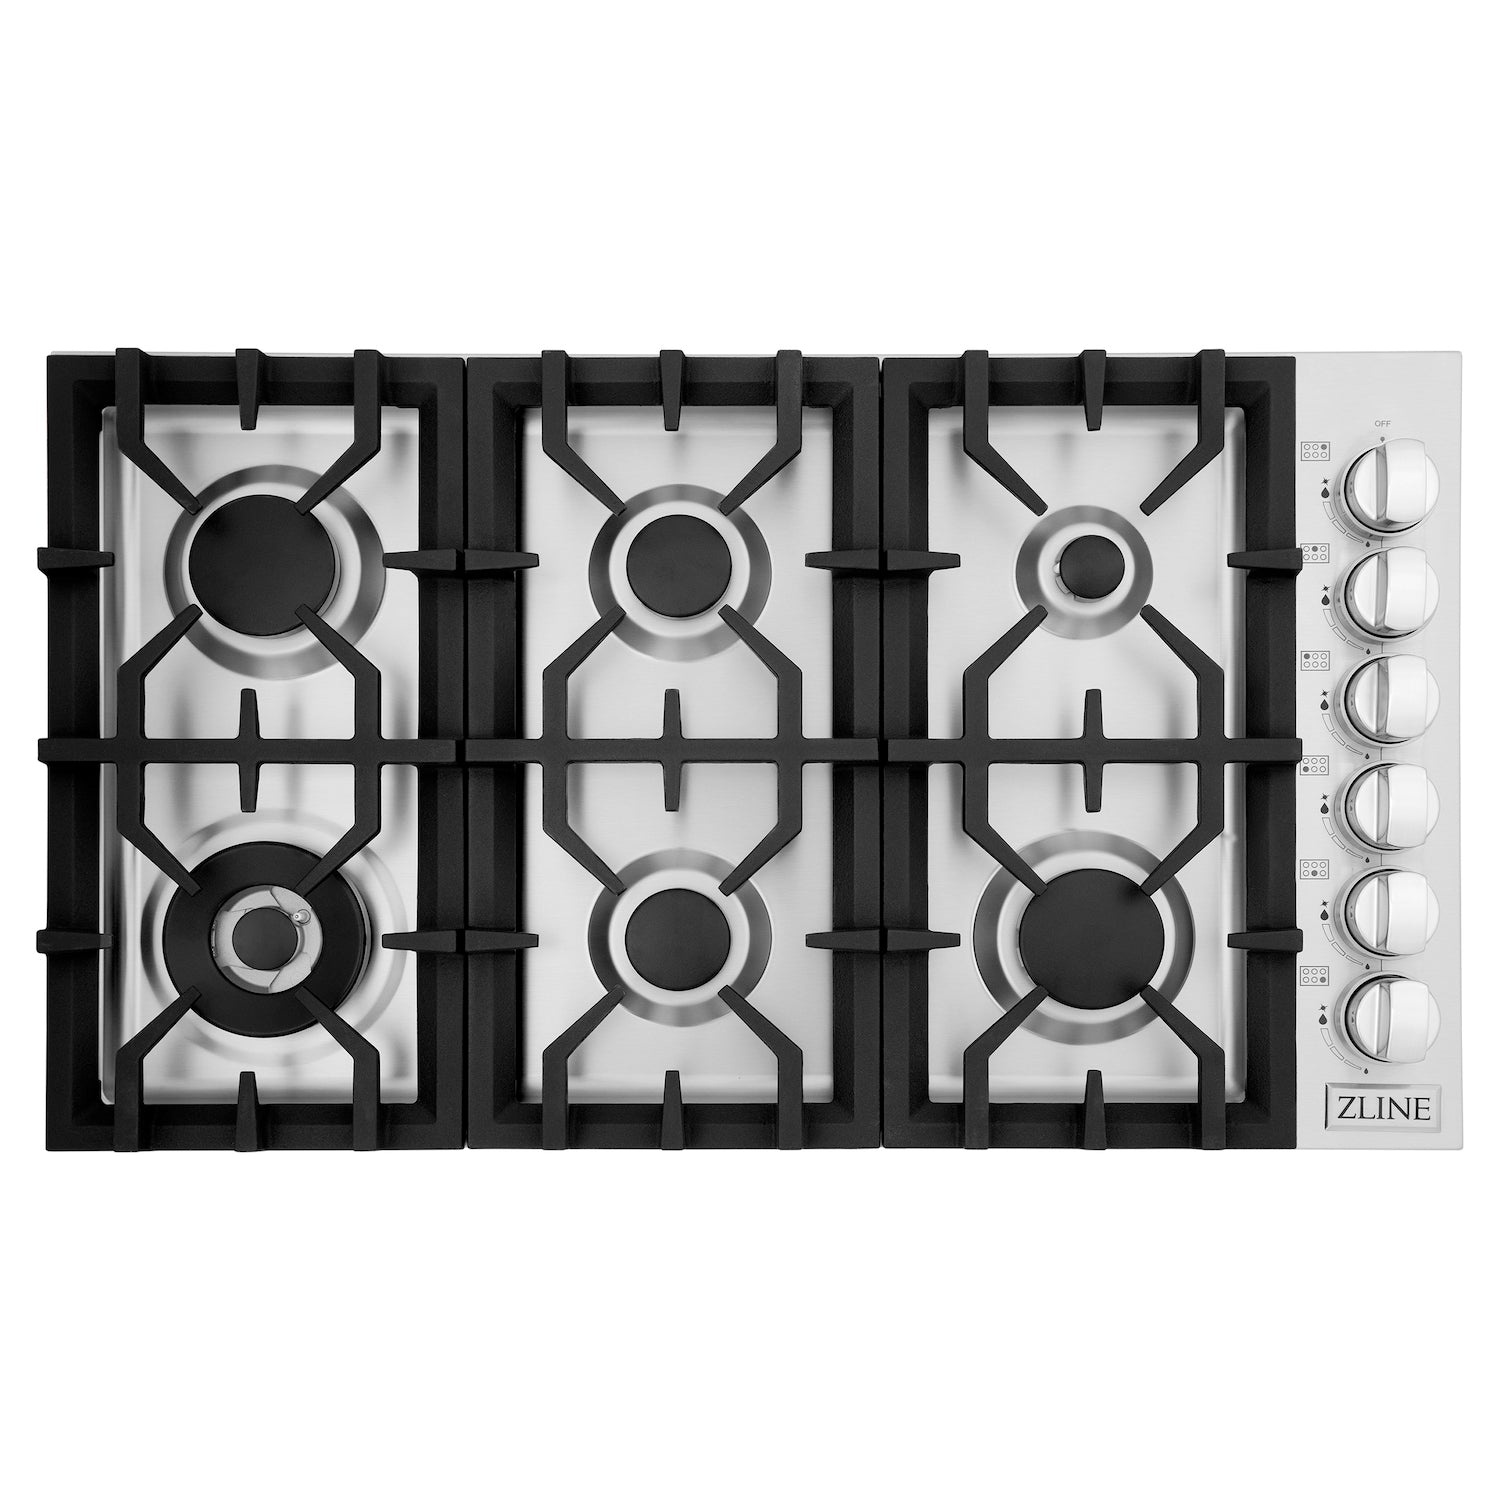 ZLINE 36 in. Gas Cooktop (RC36) from above